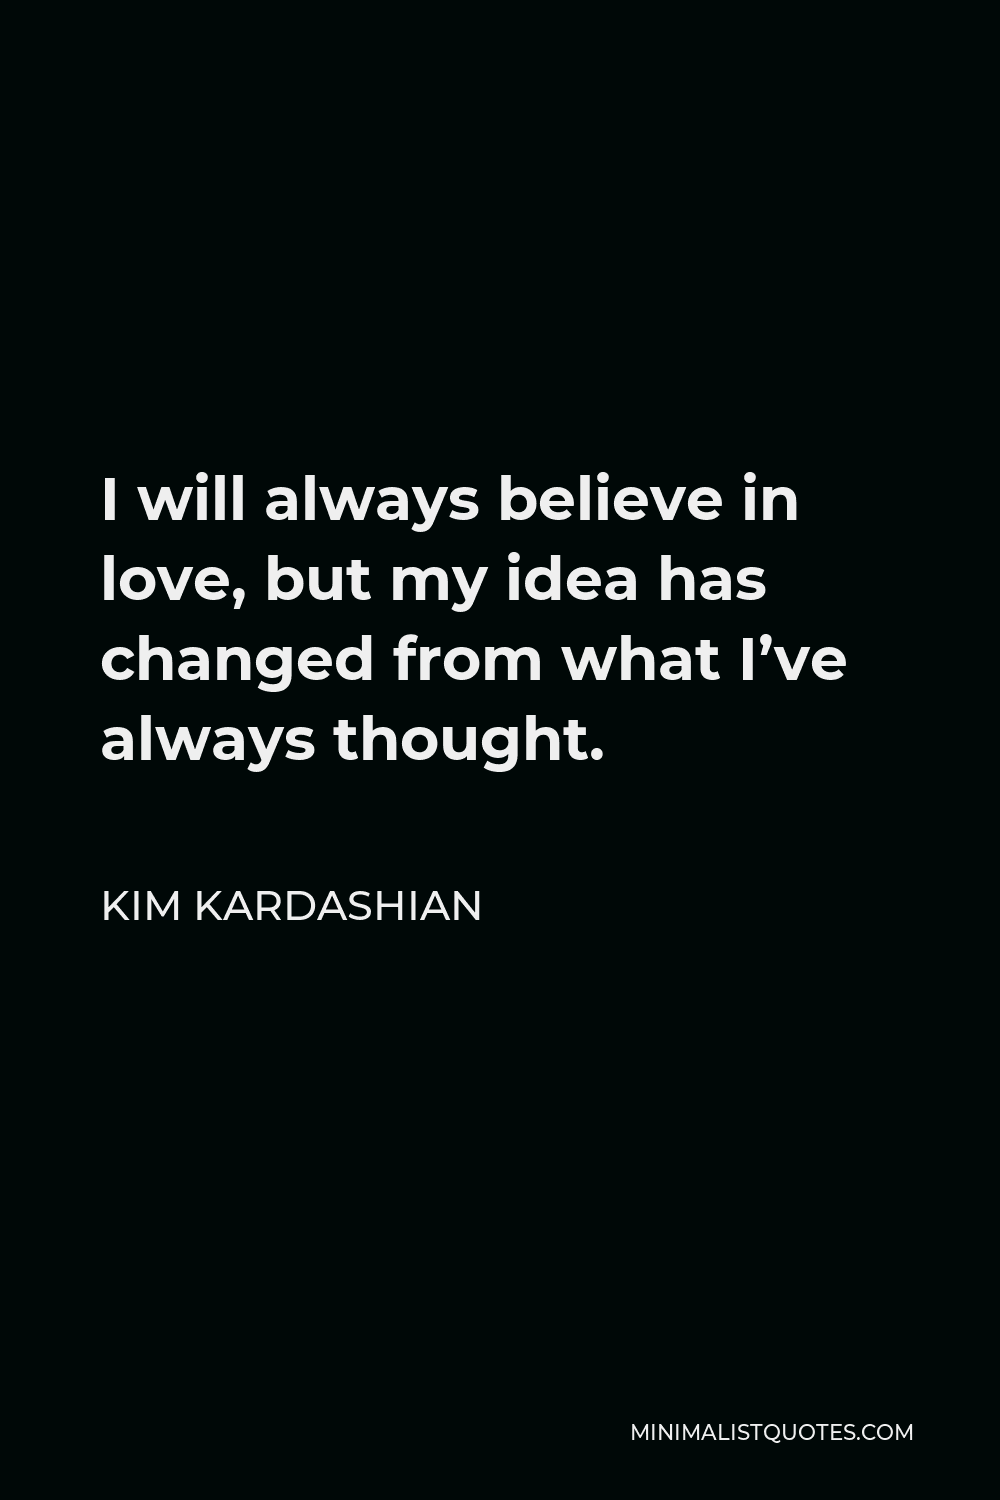 Kim Kardashian Quote: I Will Always Believe In Love, But My Idea Has Changed From What I've Always Thought.